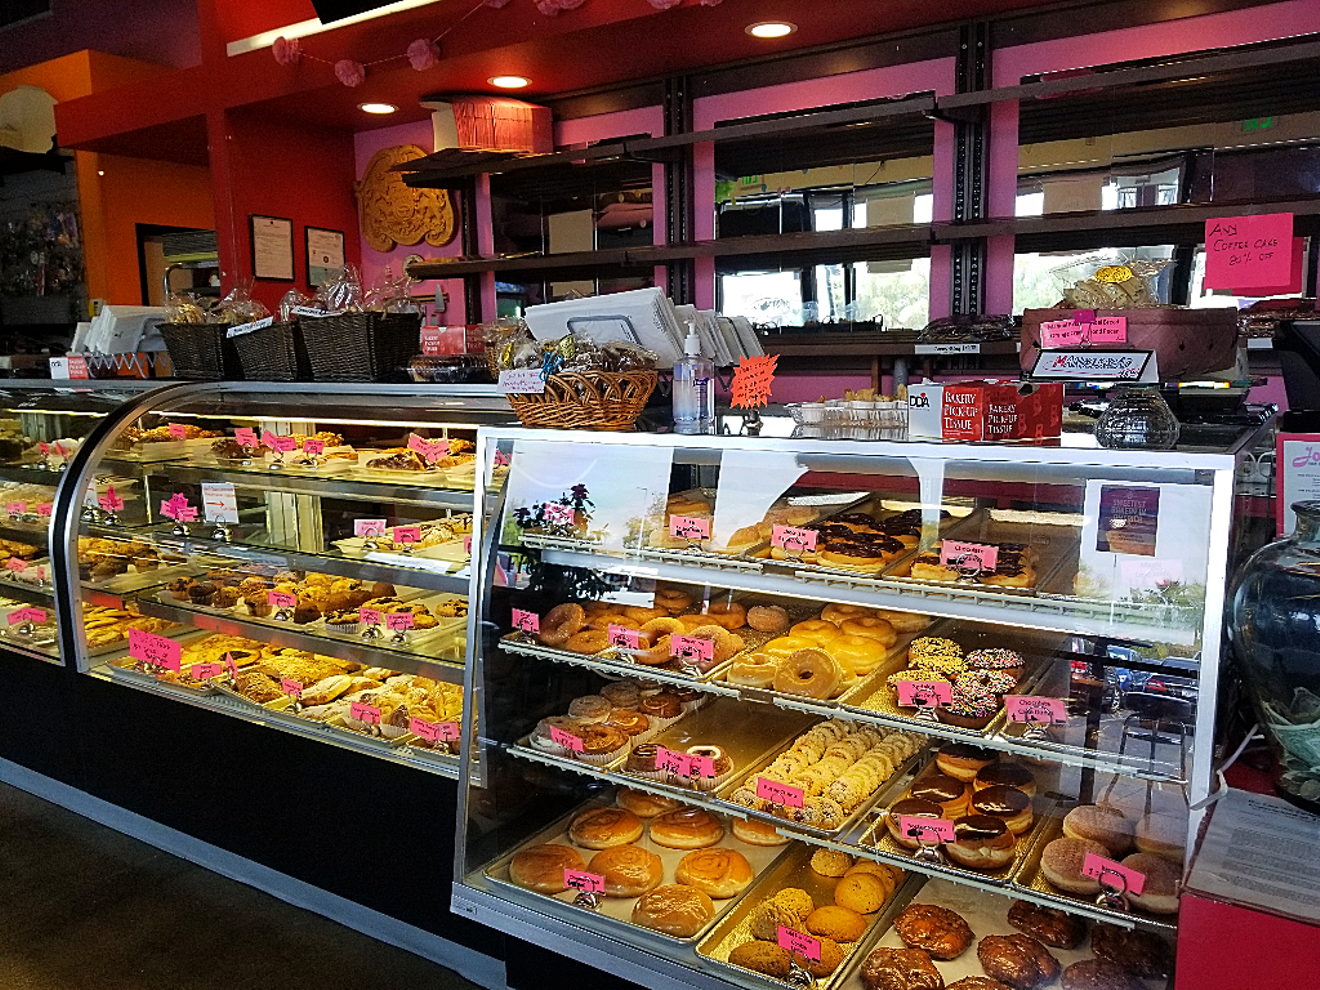 Karl's Quality Bakery, operated by the friendly, multi-generational Boerner family, has been a staple in north-central Phoenix since the early 1990s.